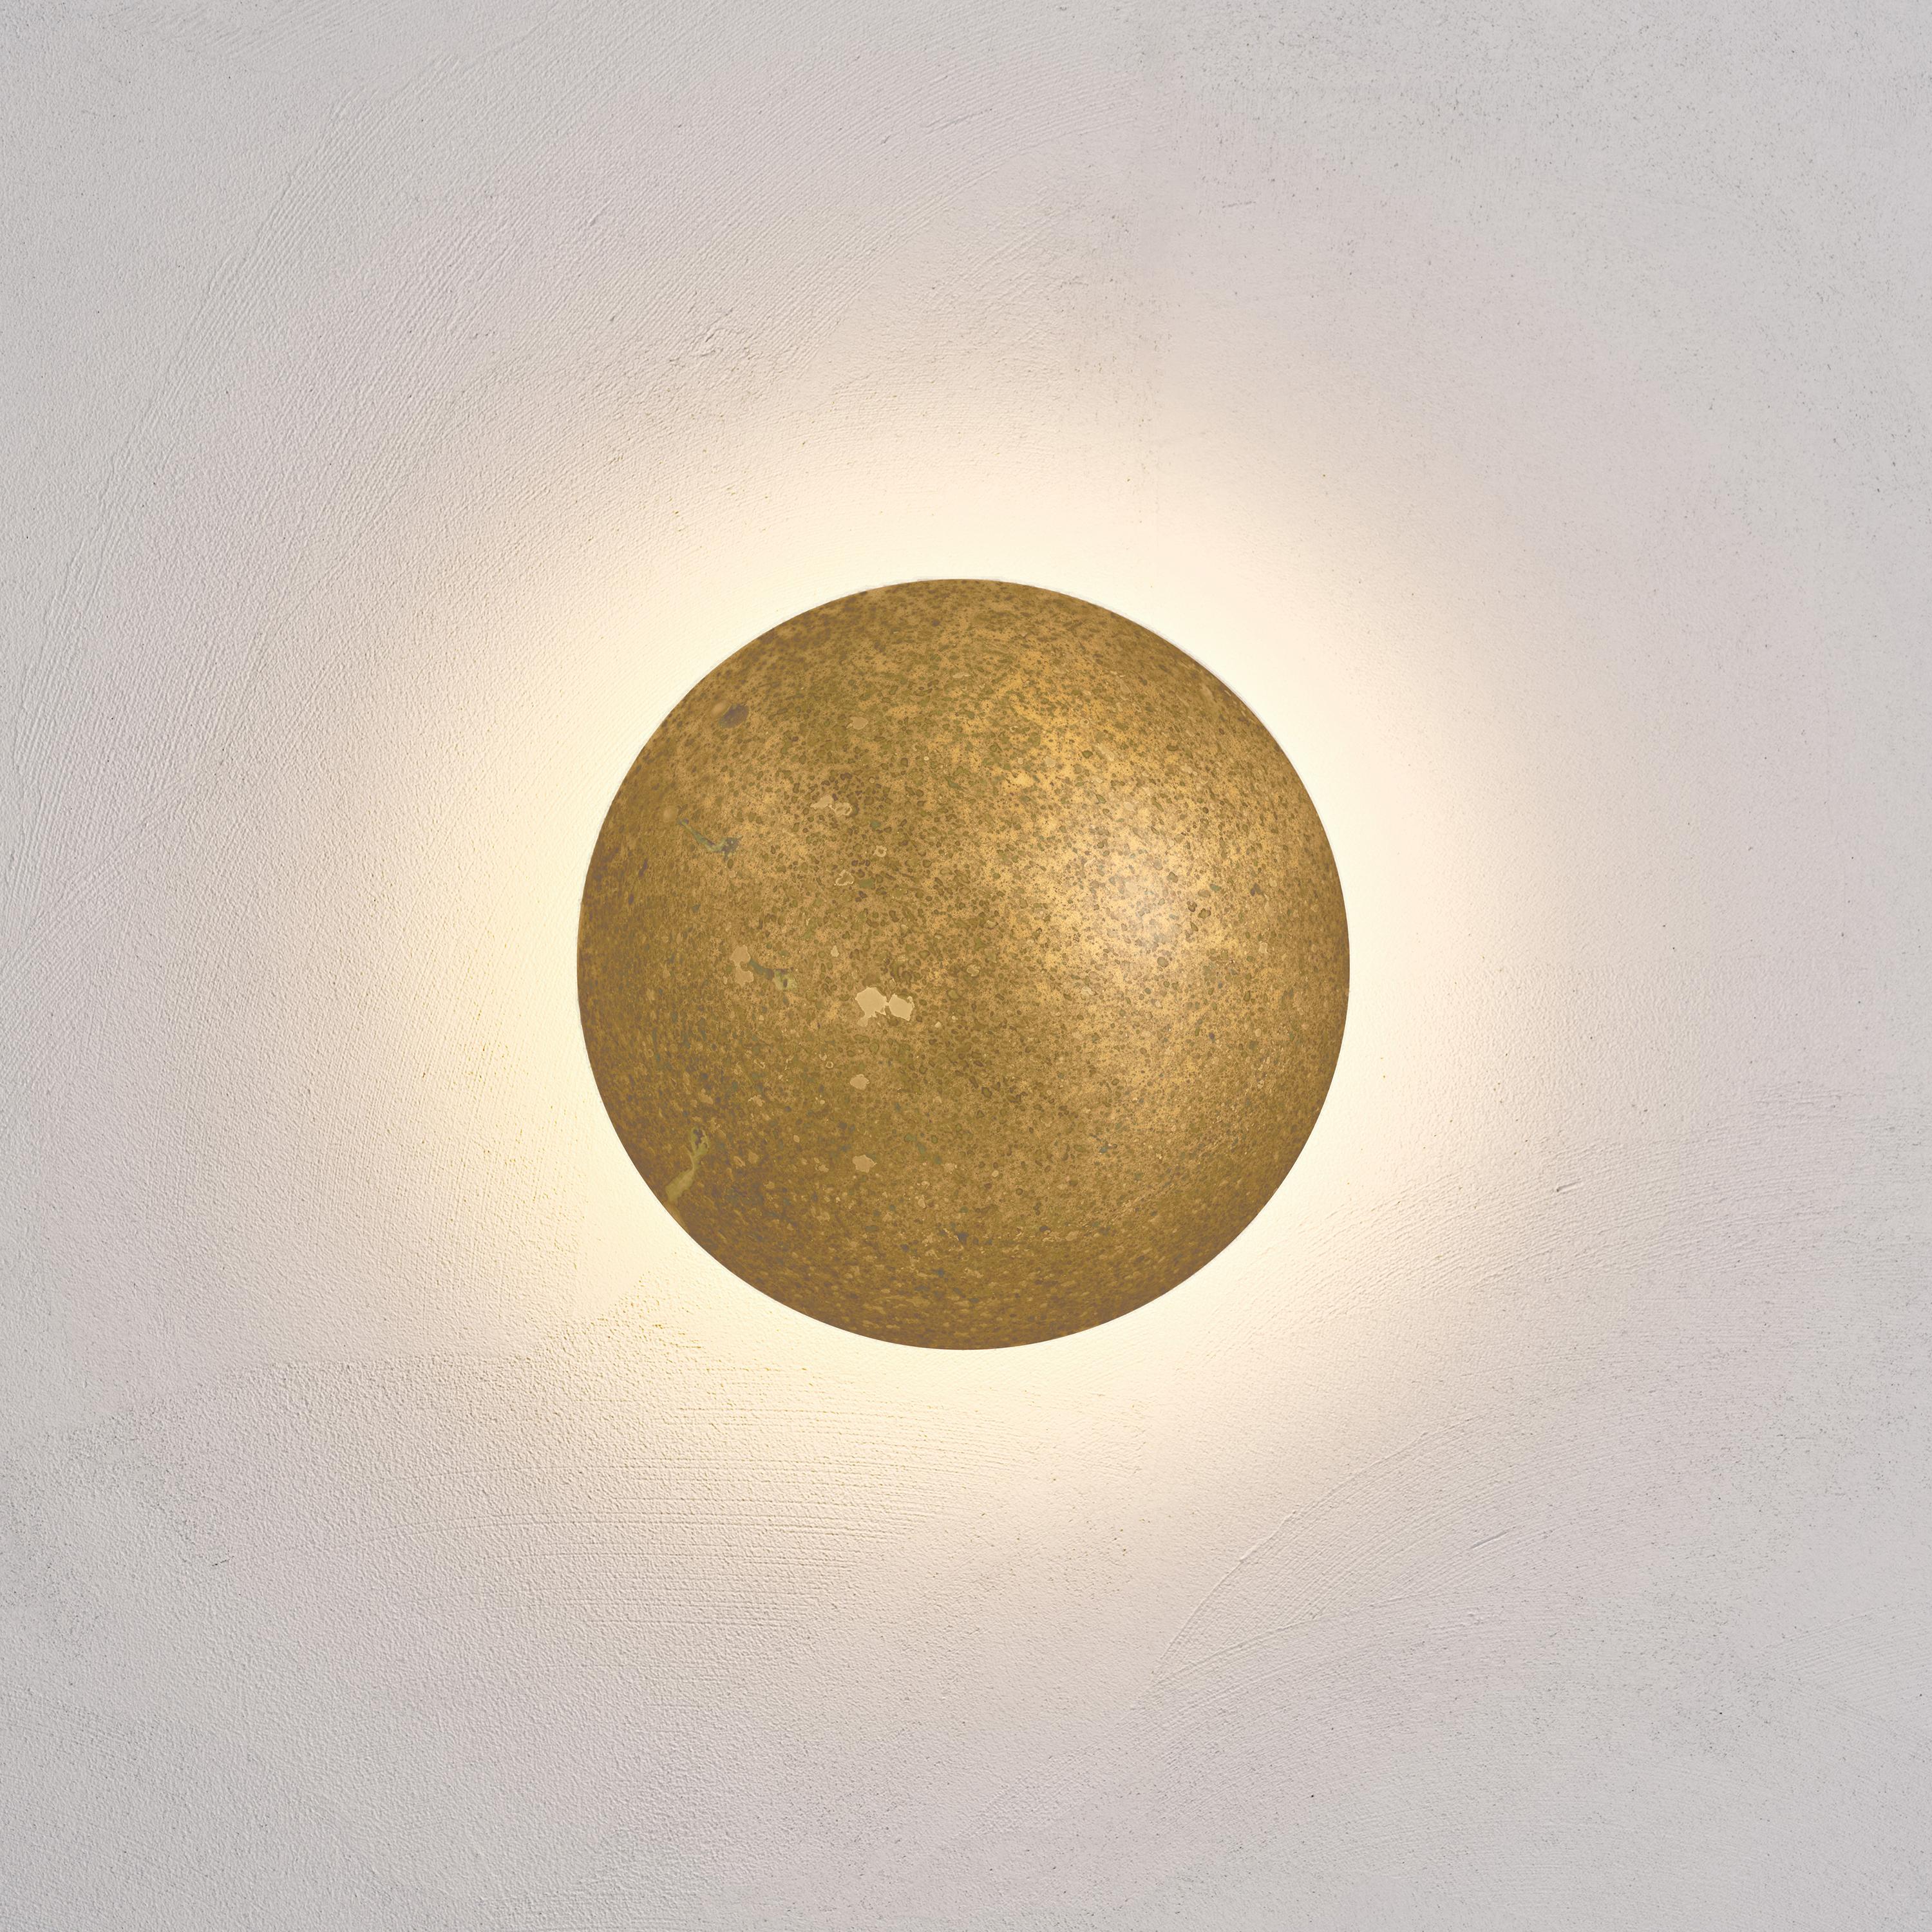 Cosmic 'Comet Oxidium 20' hand-crafted oxidised patinated brass wall light, sconce

Named after the astronomical object that signals a rebirth and new ideas, the ‘Comet’ pieces are achieved with skilful brass shaping and patina finishes that